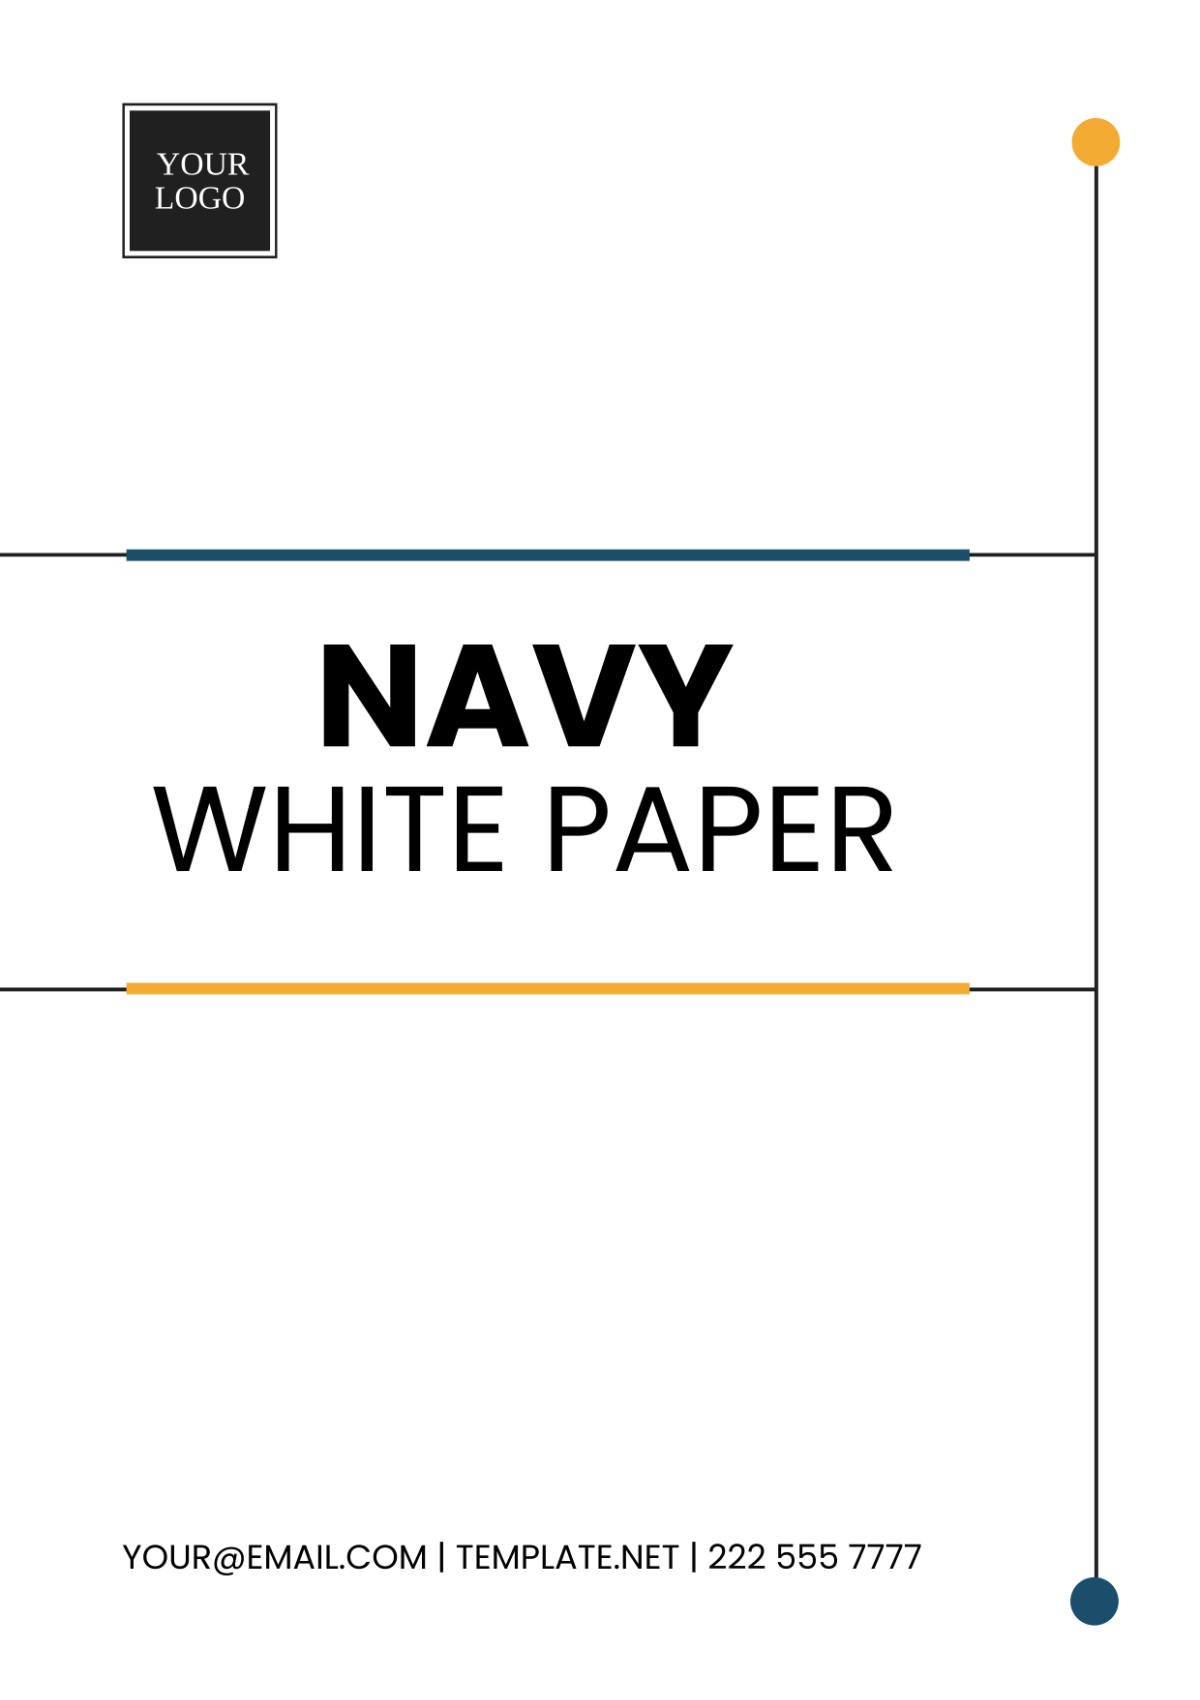 Navy White Paper Template